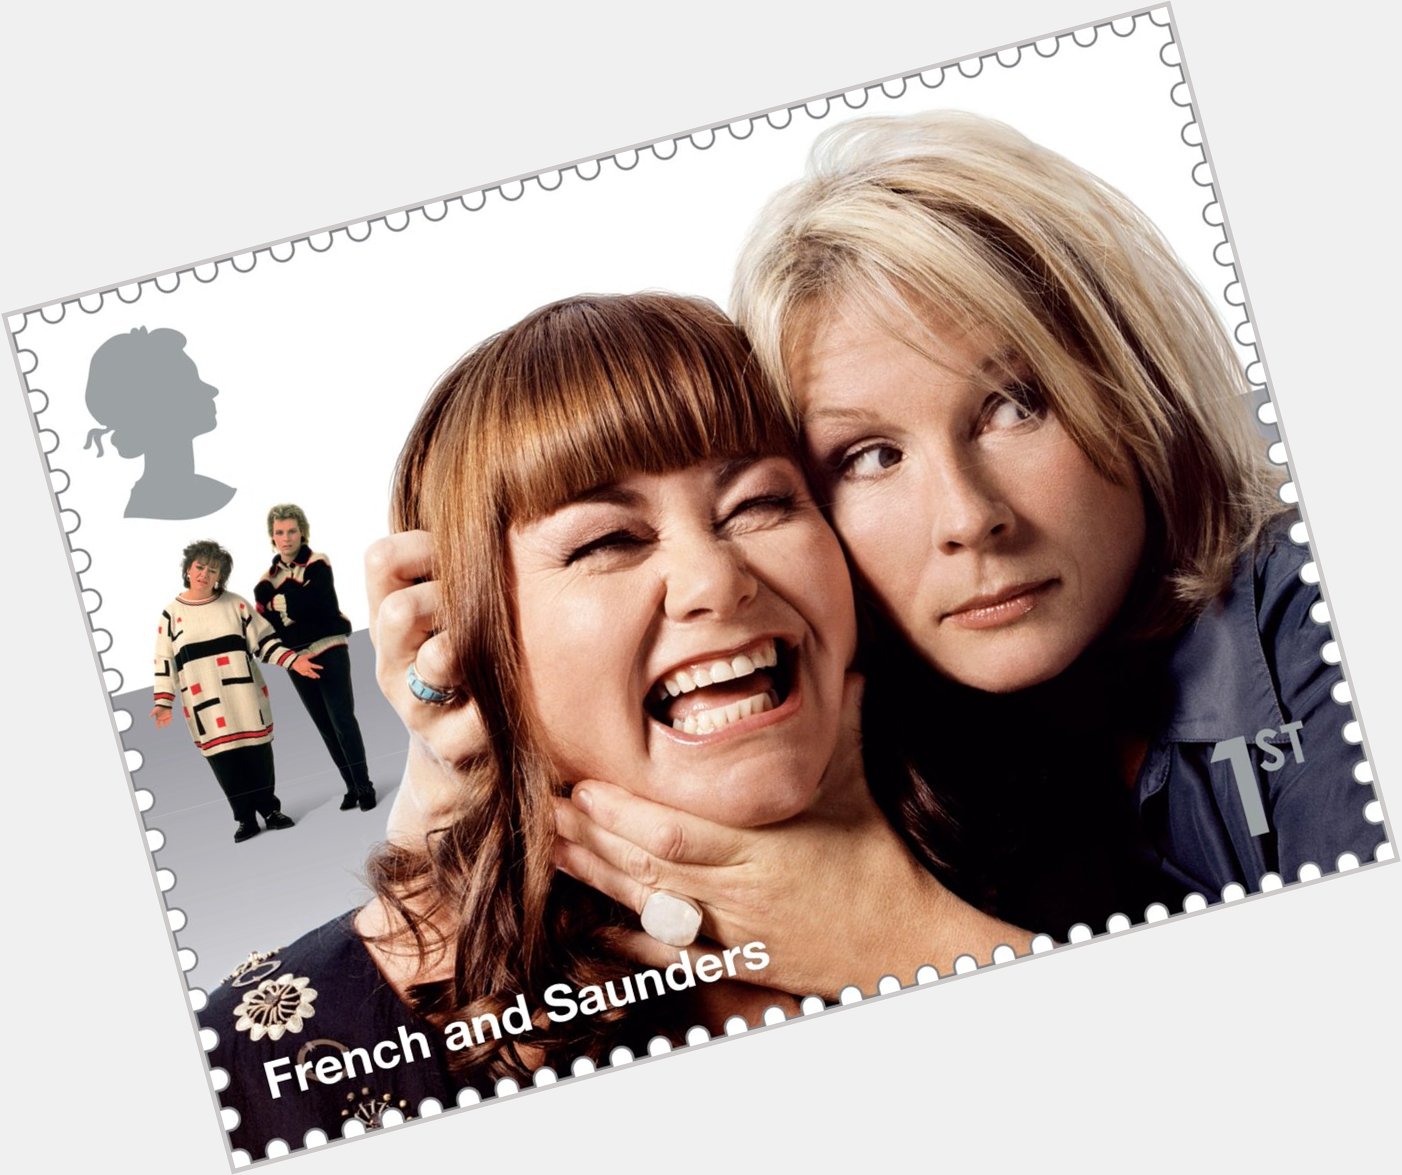 Happy birthday to Jennifer Saunders! She & Dawn French grace one of our Comedy Greats stamps.  